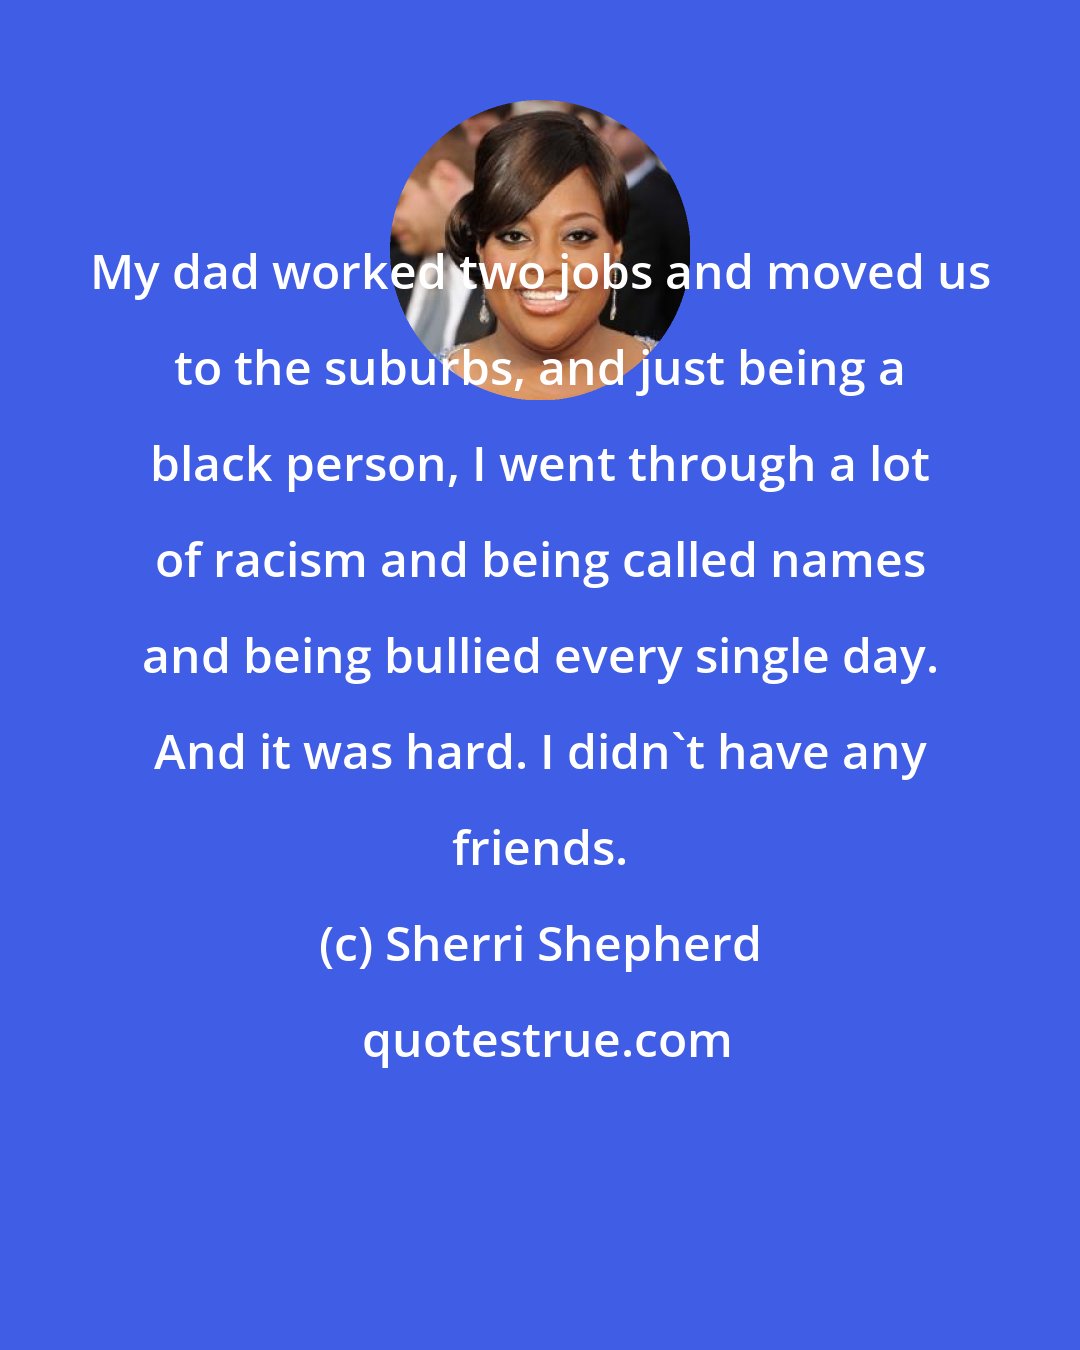 Sherri Shepherd: My dad worked two jobs and moved us to the suburbs, and just being a black person, I went through a lot of racism and being called names and being bullied every single day. And it was hard. I didn't have any friends.